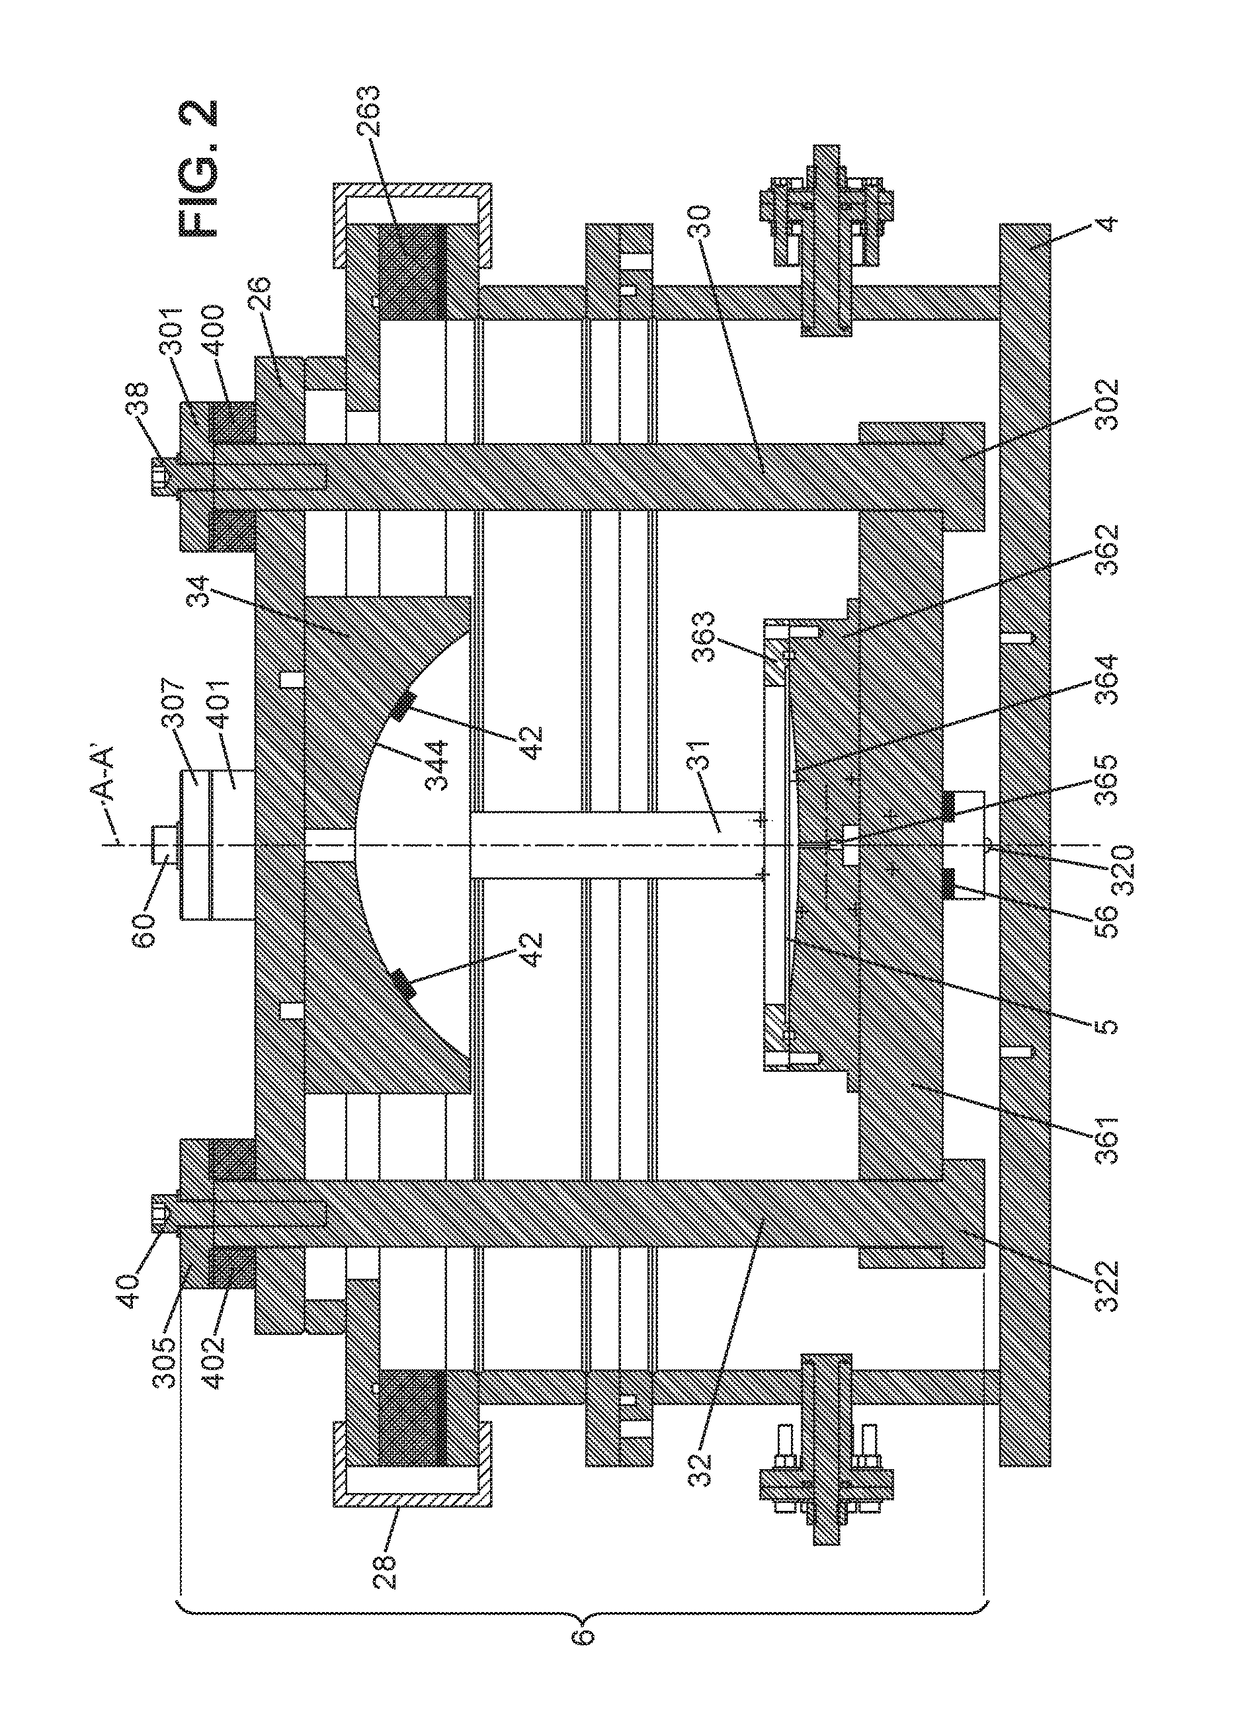 Electrohydraulic forming device